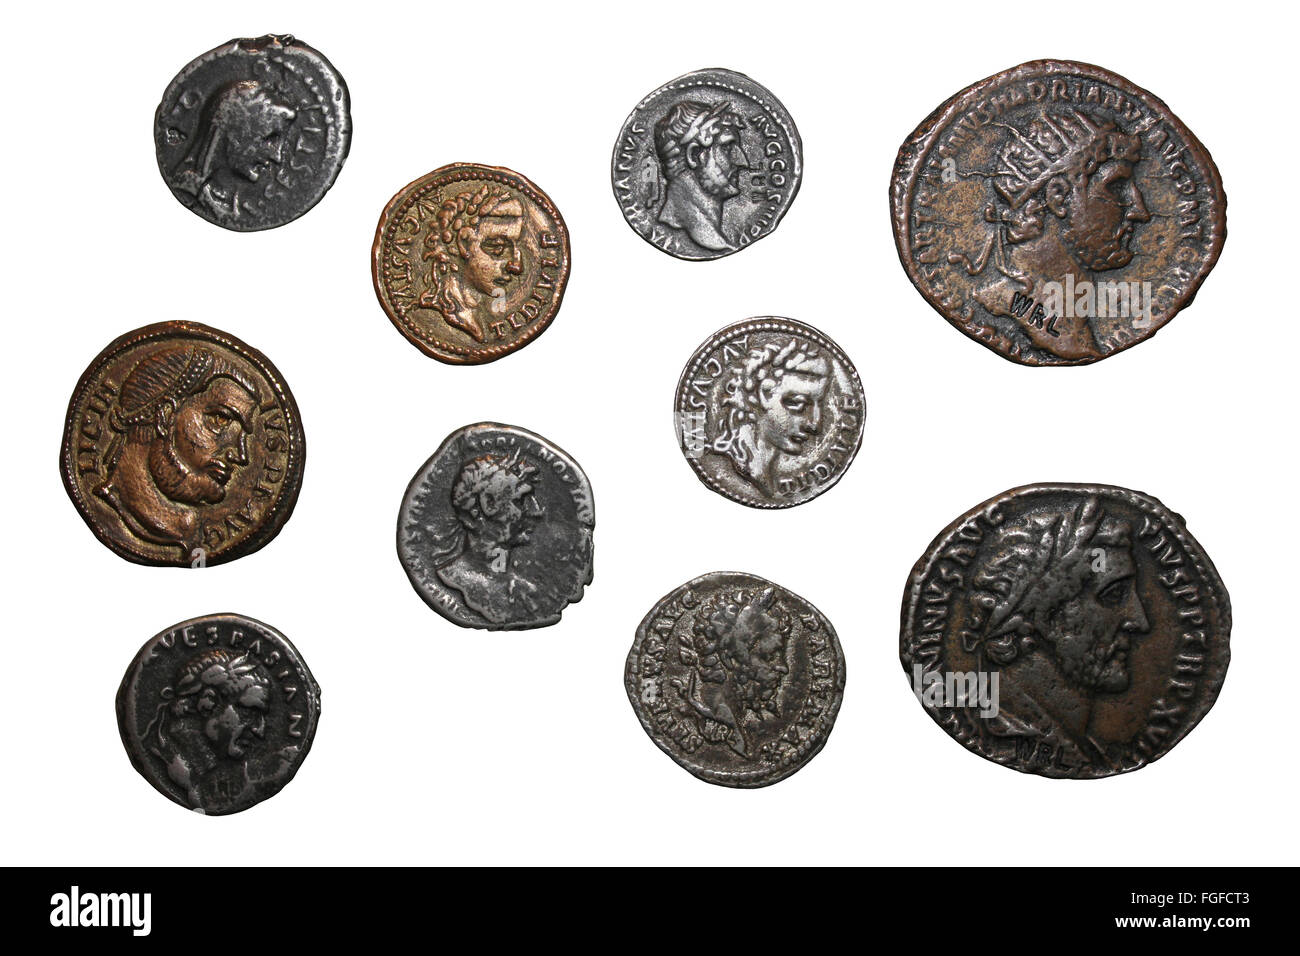 Cut-out Of Replica Roman Coins Stock Photo